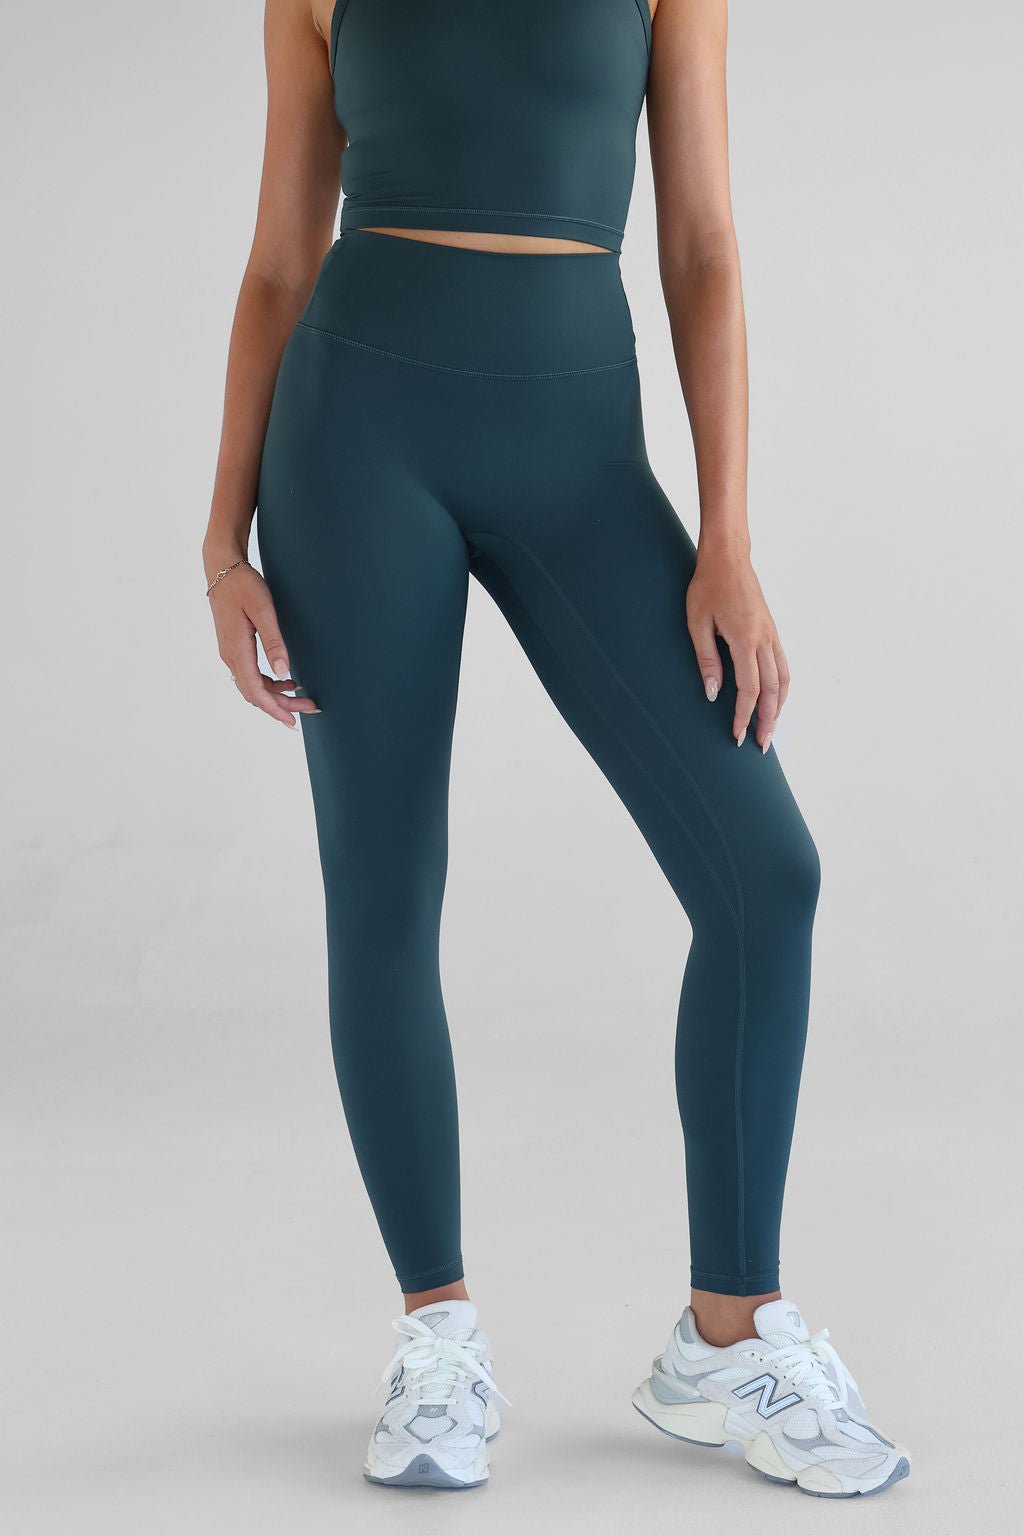 Signature Full Length Leggings - Teal SHIPPING FROM 12/02 - LEELO ACTIVE